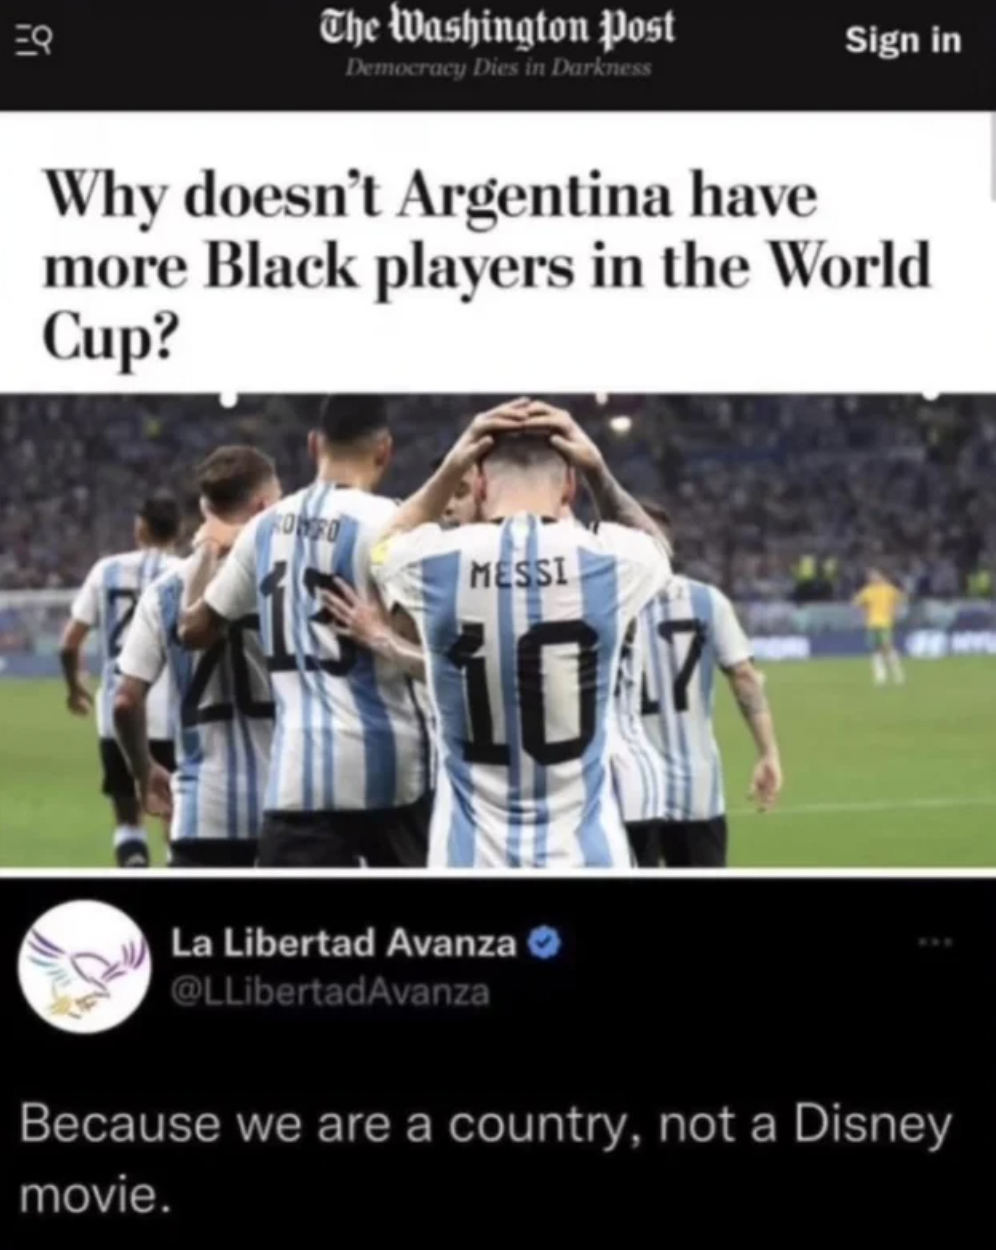 How much does the Washington Post know about Argentina?